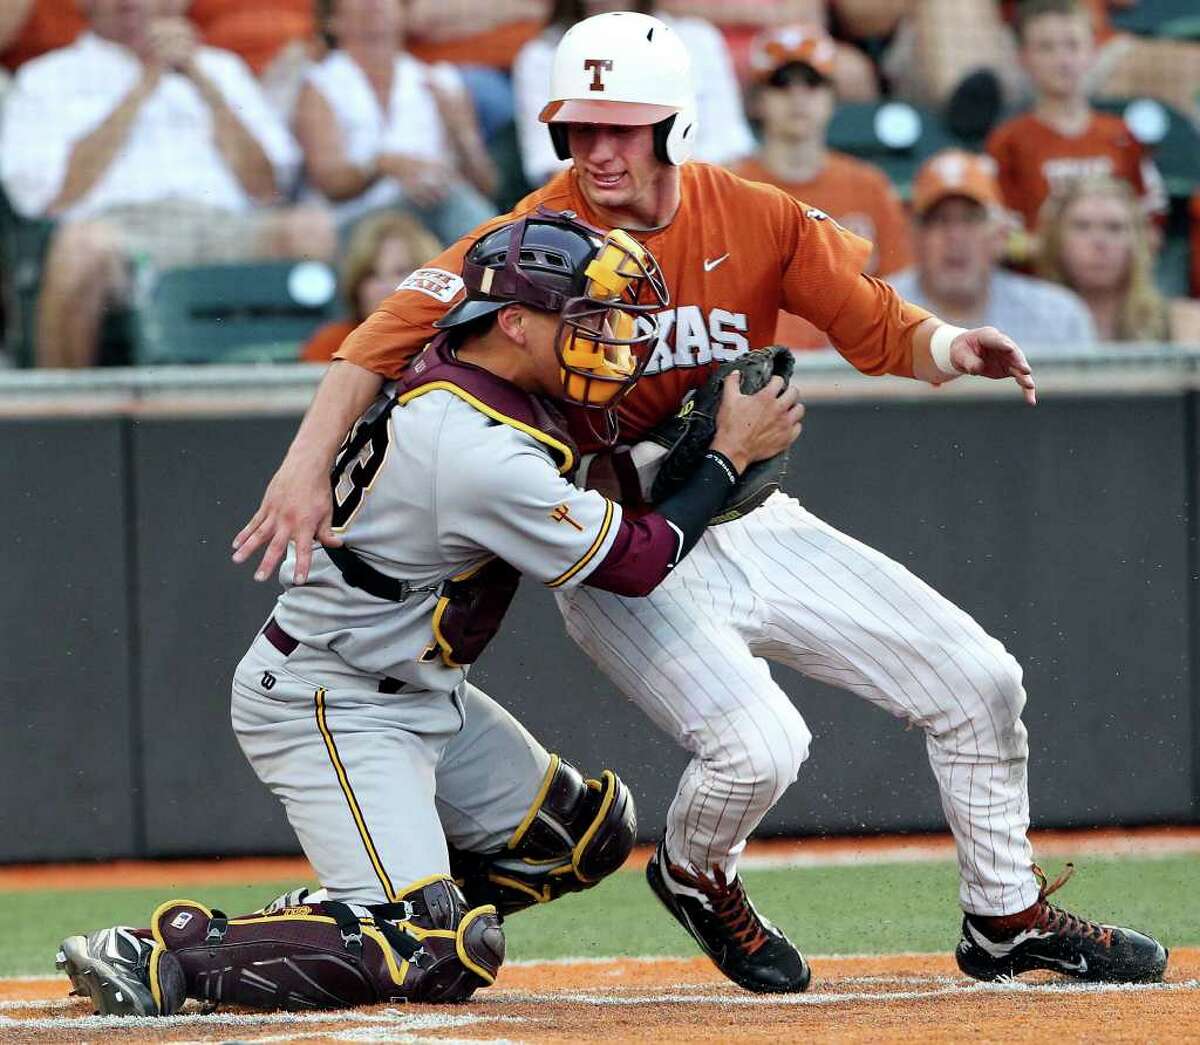 SPORTS Longhorn runner Jacob Felts is blocked from the plate by catcher Austin Barnes after being forced to try to take home in the seventh as The University of Texas Longhorns play Arizona State at Disch-Falk Field in Austin on June 10, 2011. Tom Reel/Staff